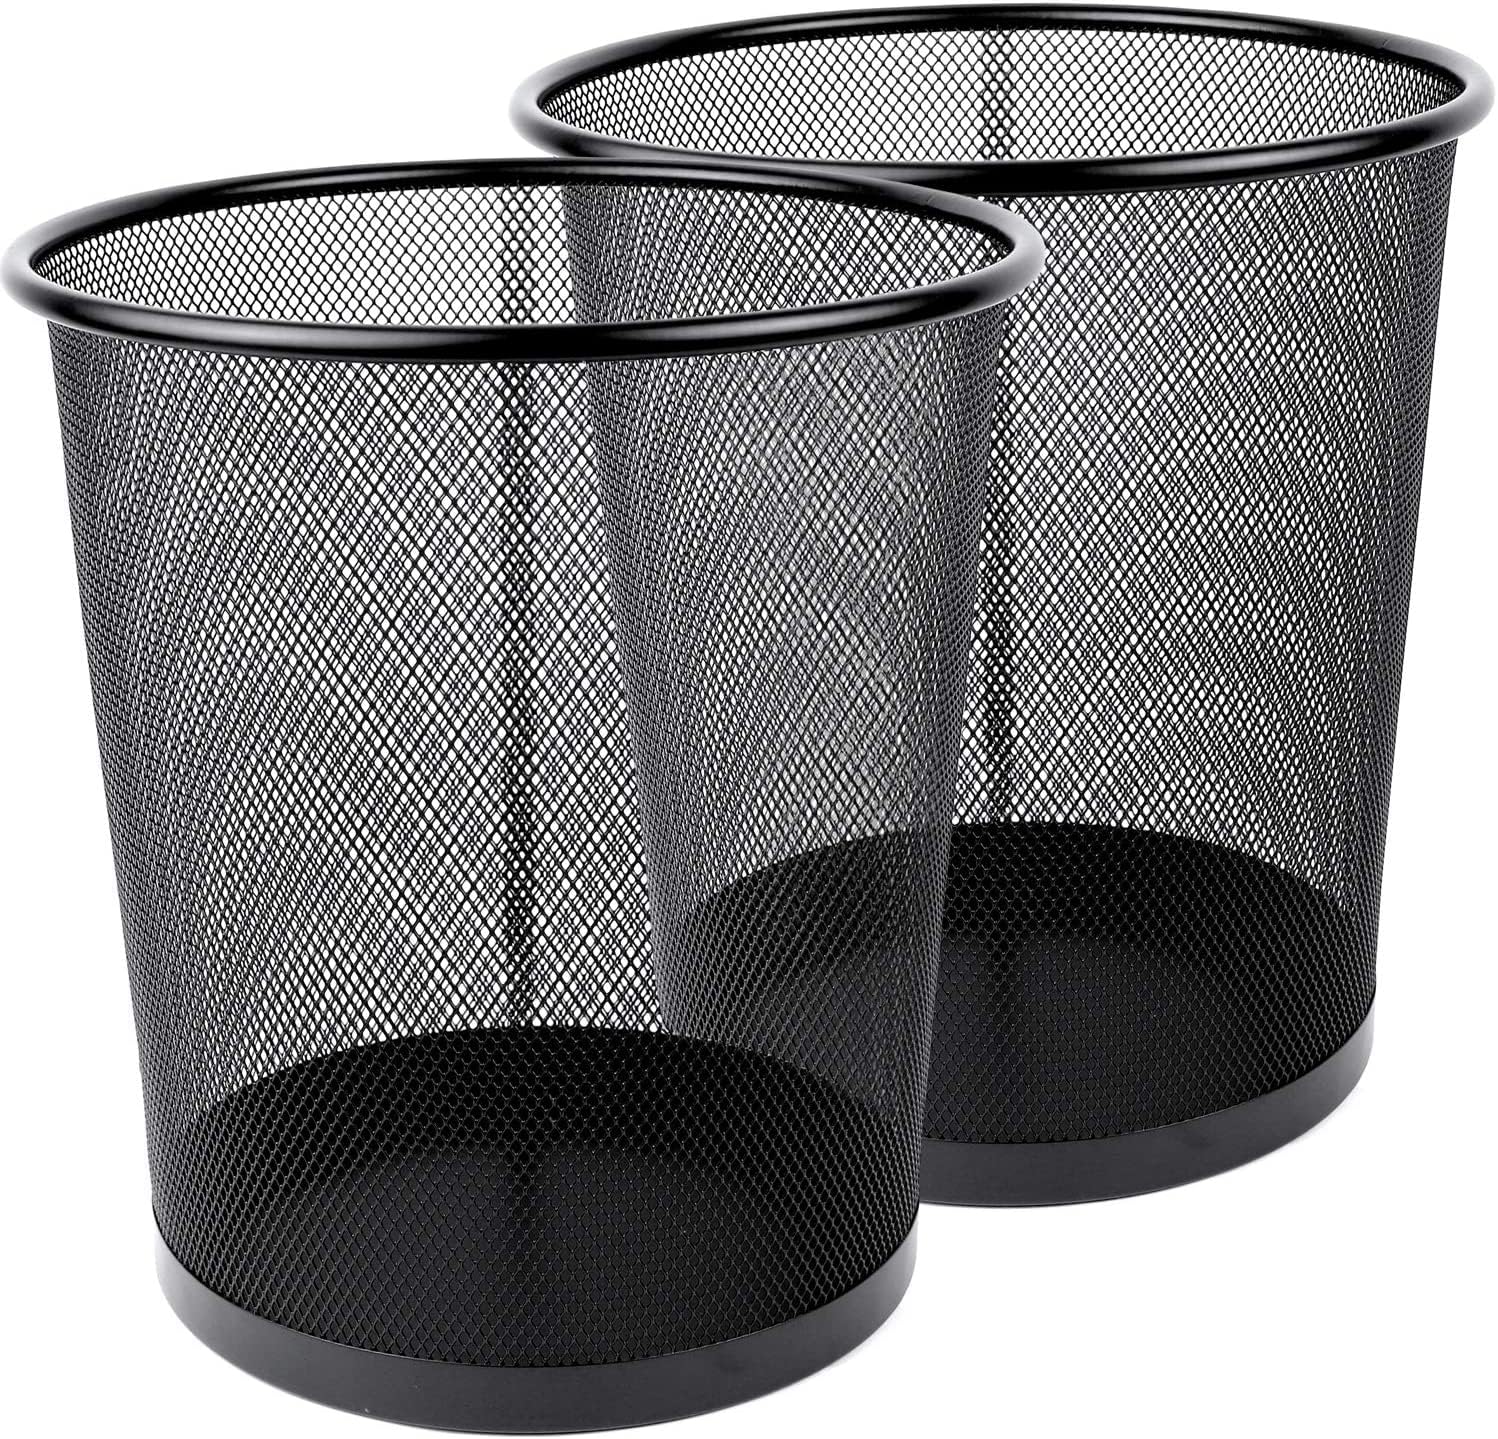 Greenco Small Trash Cans for Home or Office, 2-Pack, 4.5 Gallon Black Mesh Round Trash Cans - Desk Trash Can - Lightweight, Sturdy for Under Desk, Kitchen, Bedroom, Den, Dorm Room, or Recycling Can